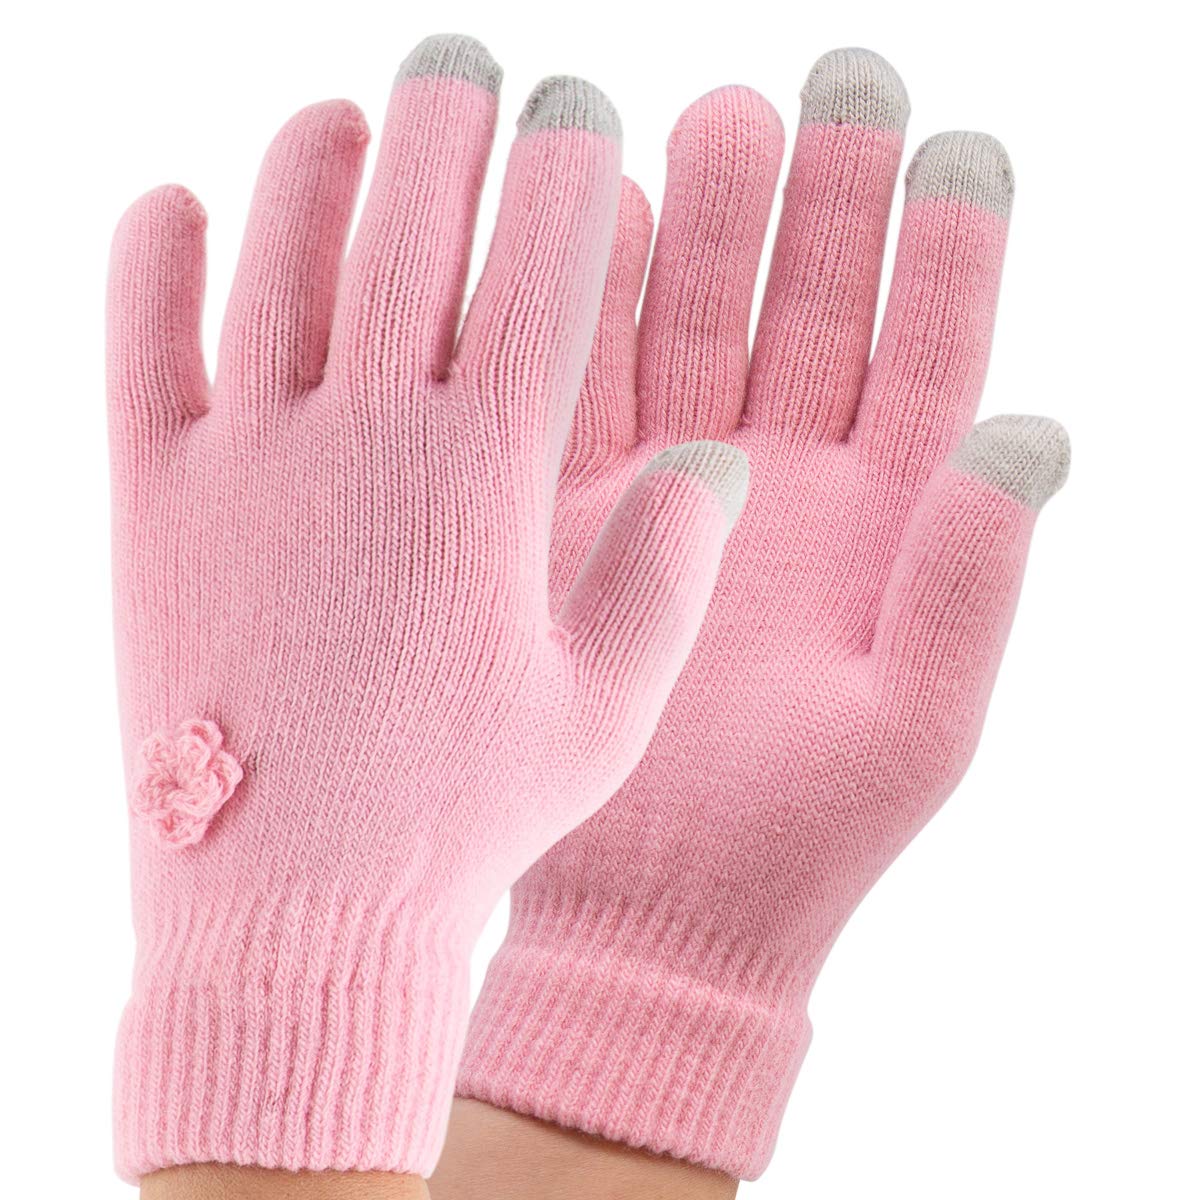 Pugs (5 Pack) Tech Gloves Women Warm Knit Texting Gloves With Touchscreen Fingers Ladies Winter Gloves For Smartphone - Opticdeals